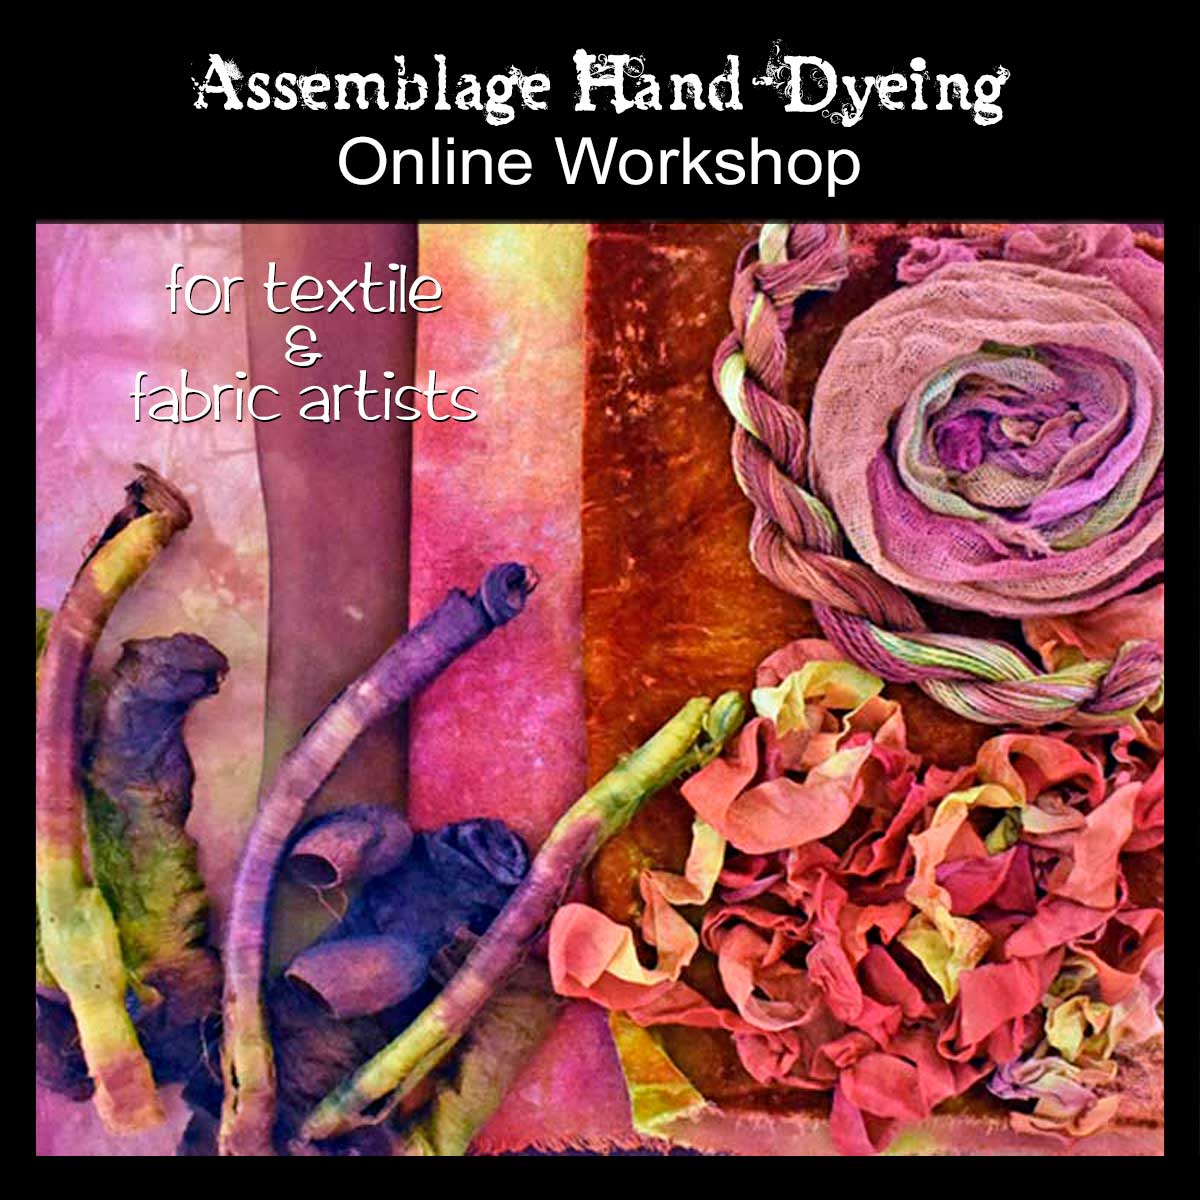 Assemblage Hand-Dyeing